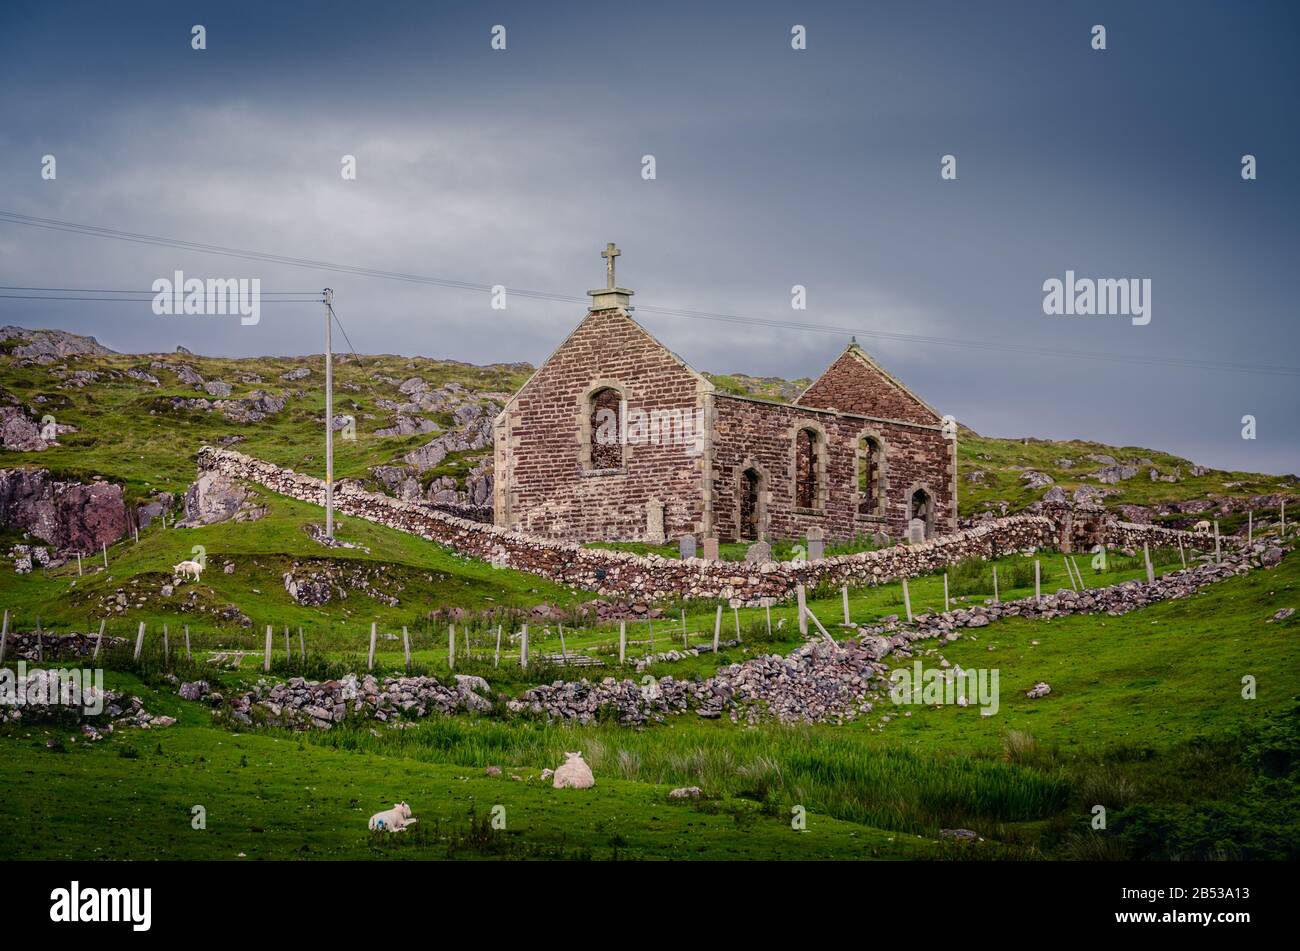 Ruined church with sheep among tombs, Highlands, Scotland, UK Stock Photo